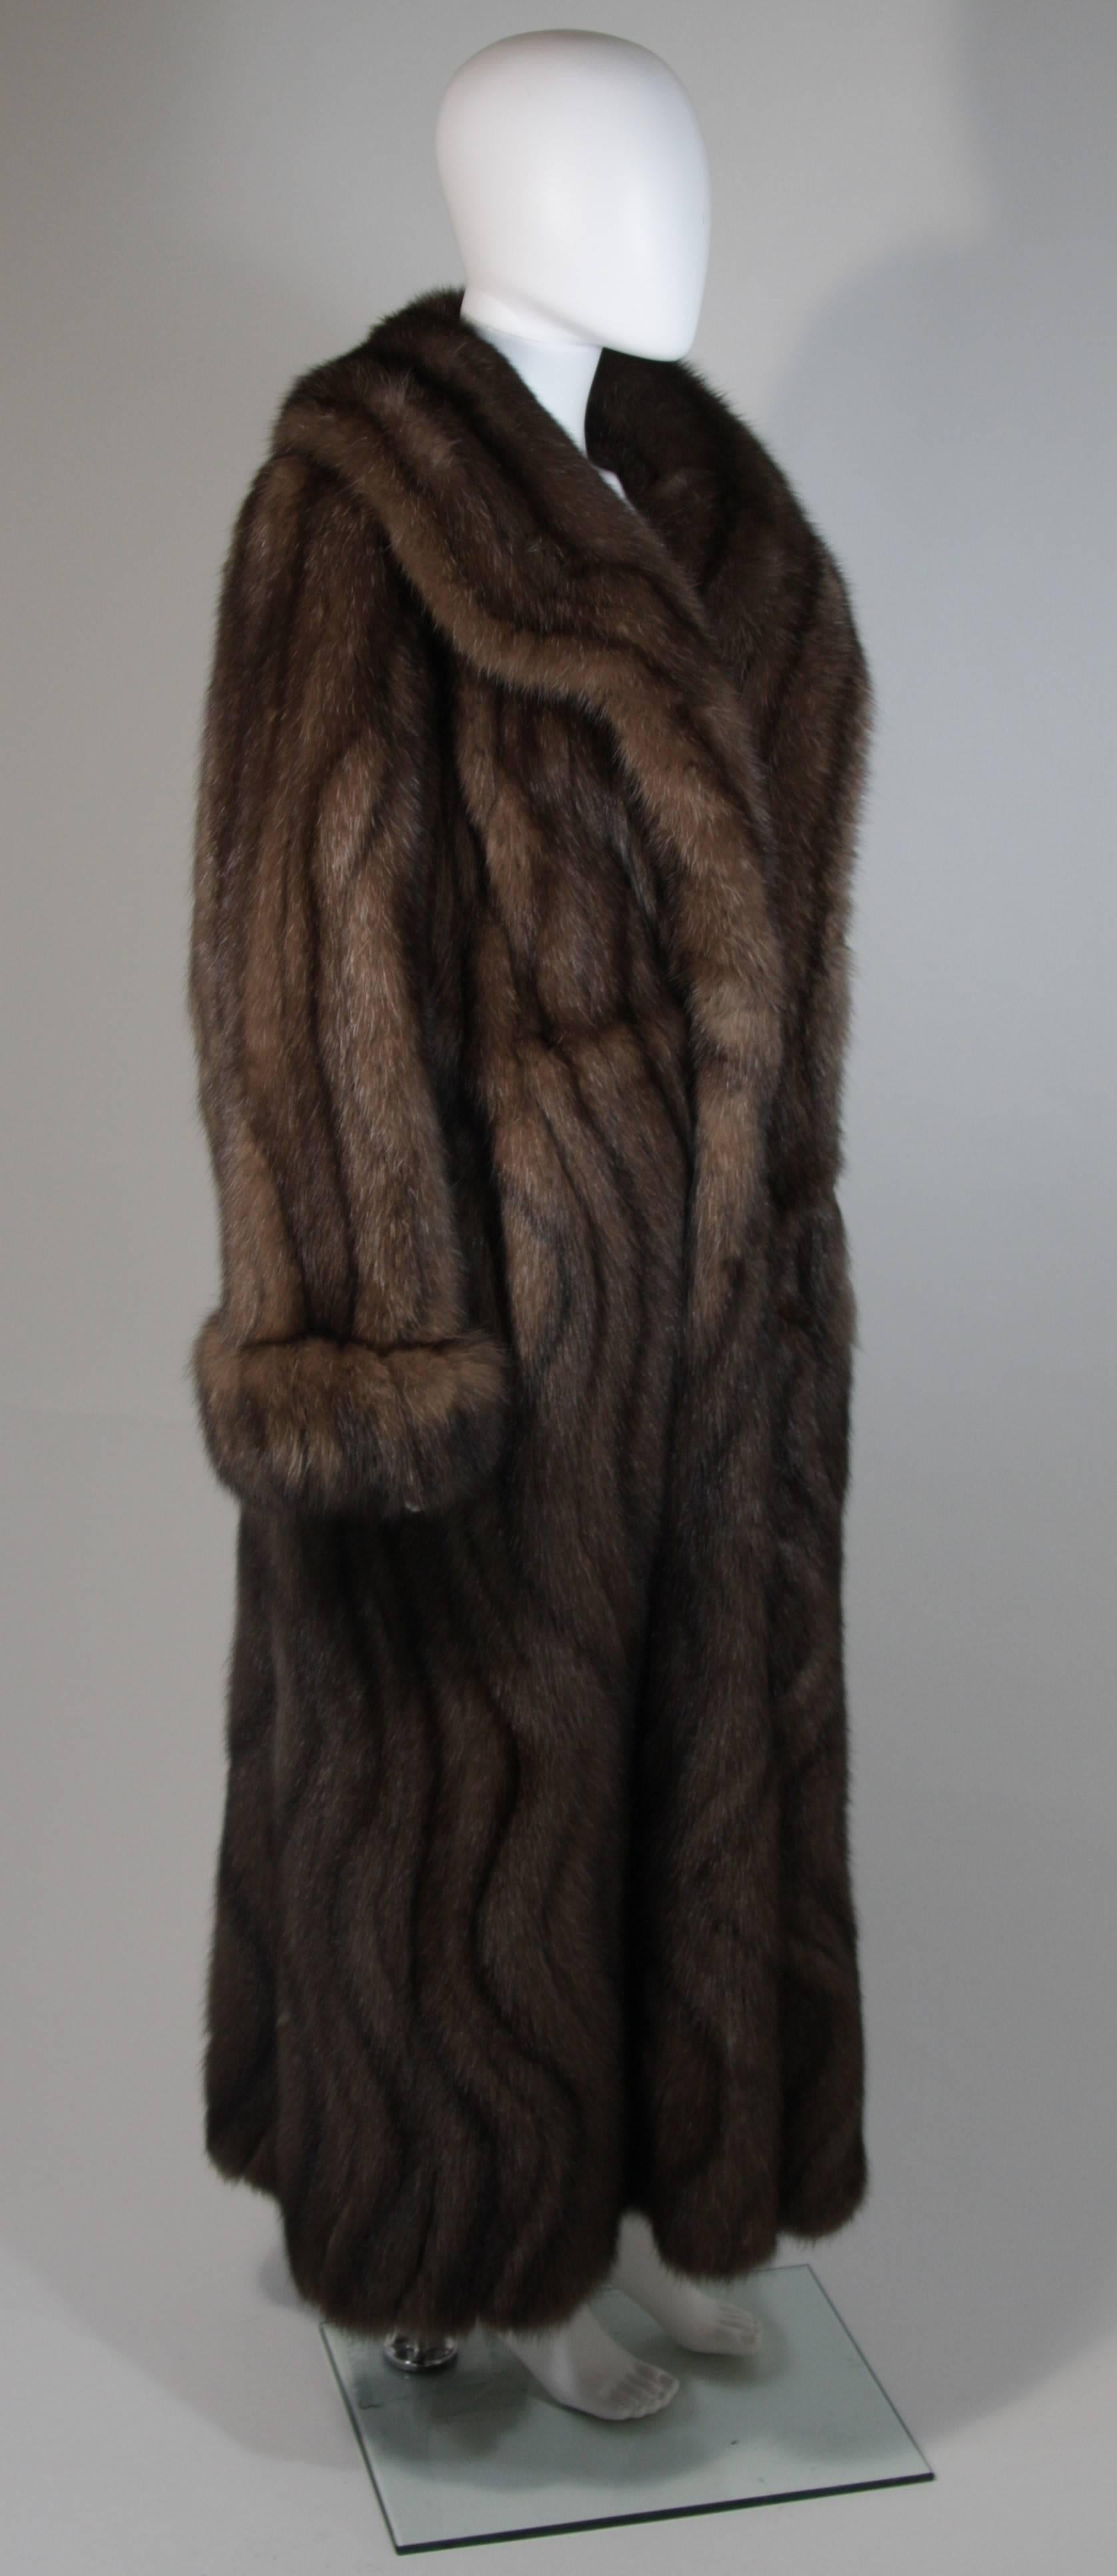 Women's Russian Sable Coat with Wave Pattern Excellent Condition Retail $300, 000.00